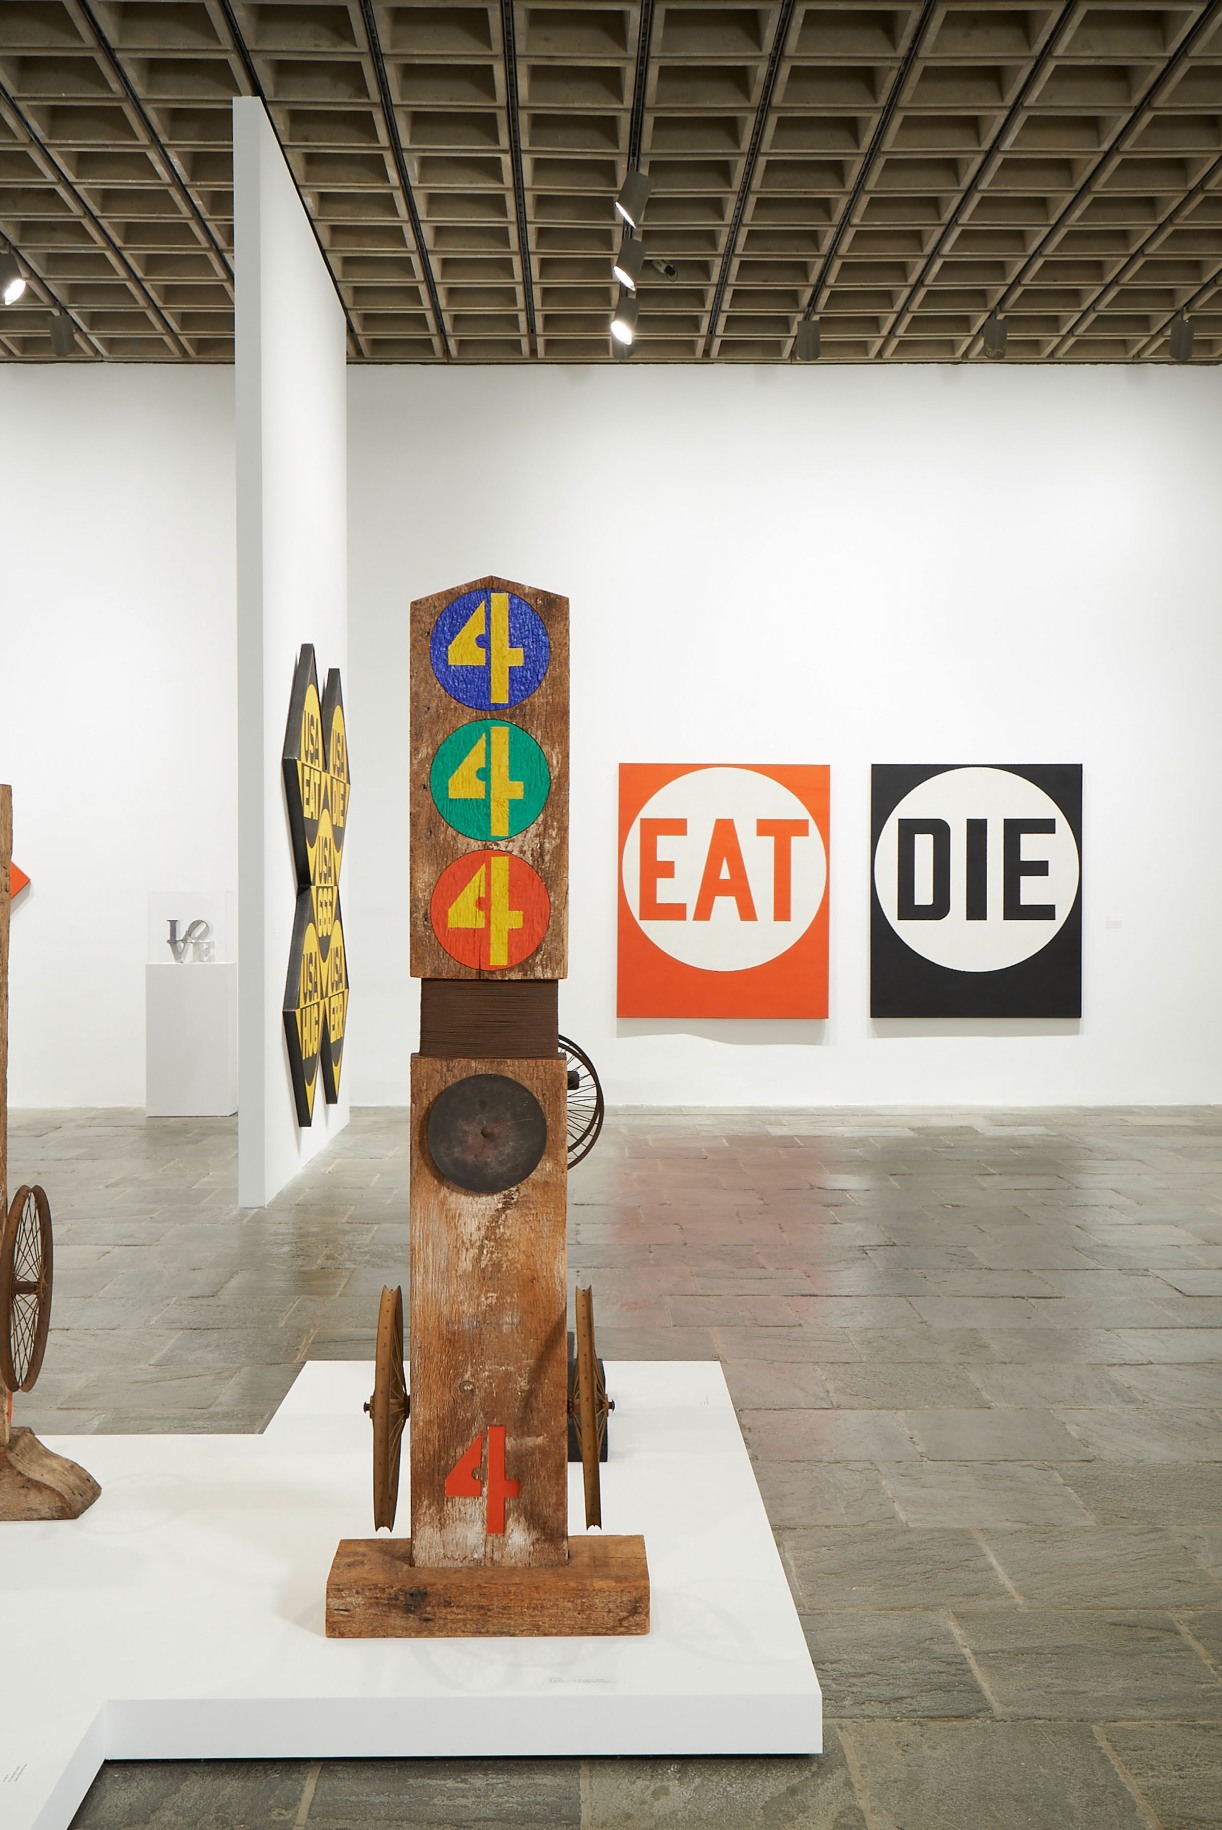 Installation view of Robert Indiana: Beyond LOVE, Whitney Museum of American Art, New York, September 26, 2013&ndash;January 5, 2014. Left to right, LOVE (1966&ndash;1968),&nbsp;USA 666 (The Sixth American Dream) (1964&ndash;66),&nbsp;Four (1959&ndash;62/1972), and Eat/Die (1962). Photo: Tom Powel Imaging